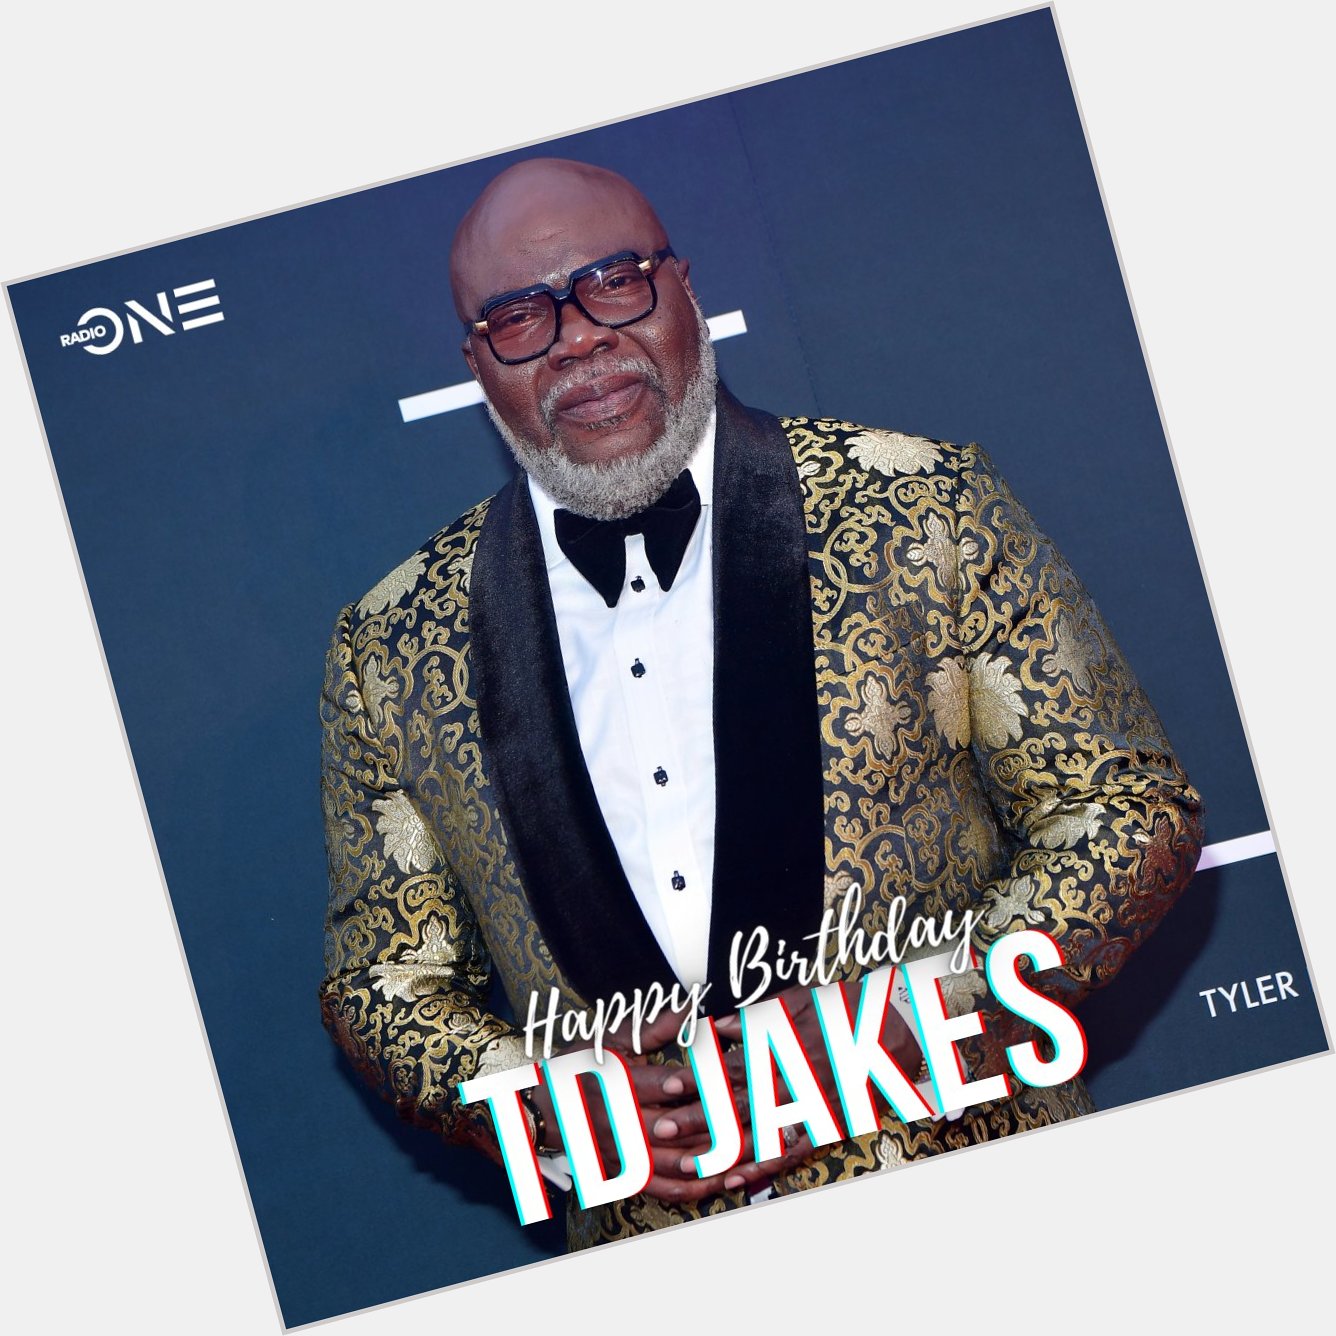 Wishing T.D. Jakes a Happy Birthday! Today the bishop, author and filmmaker celebrates 64 years of life  